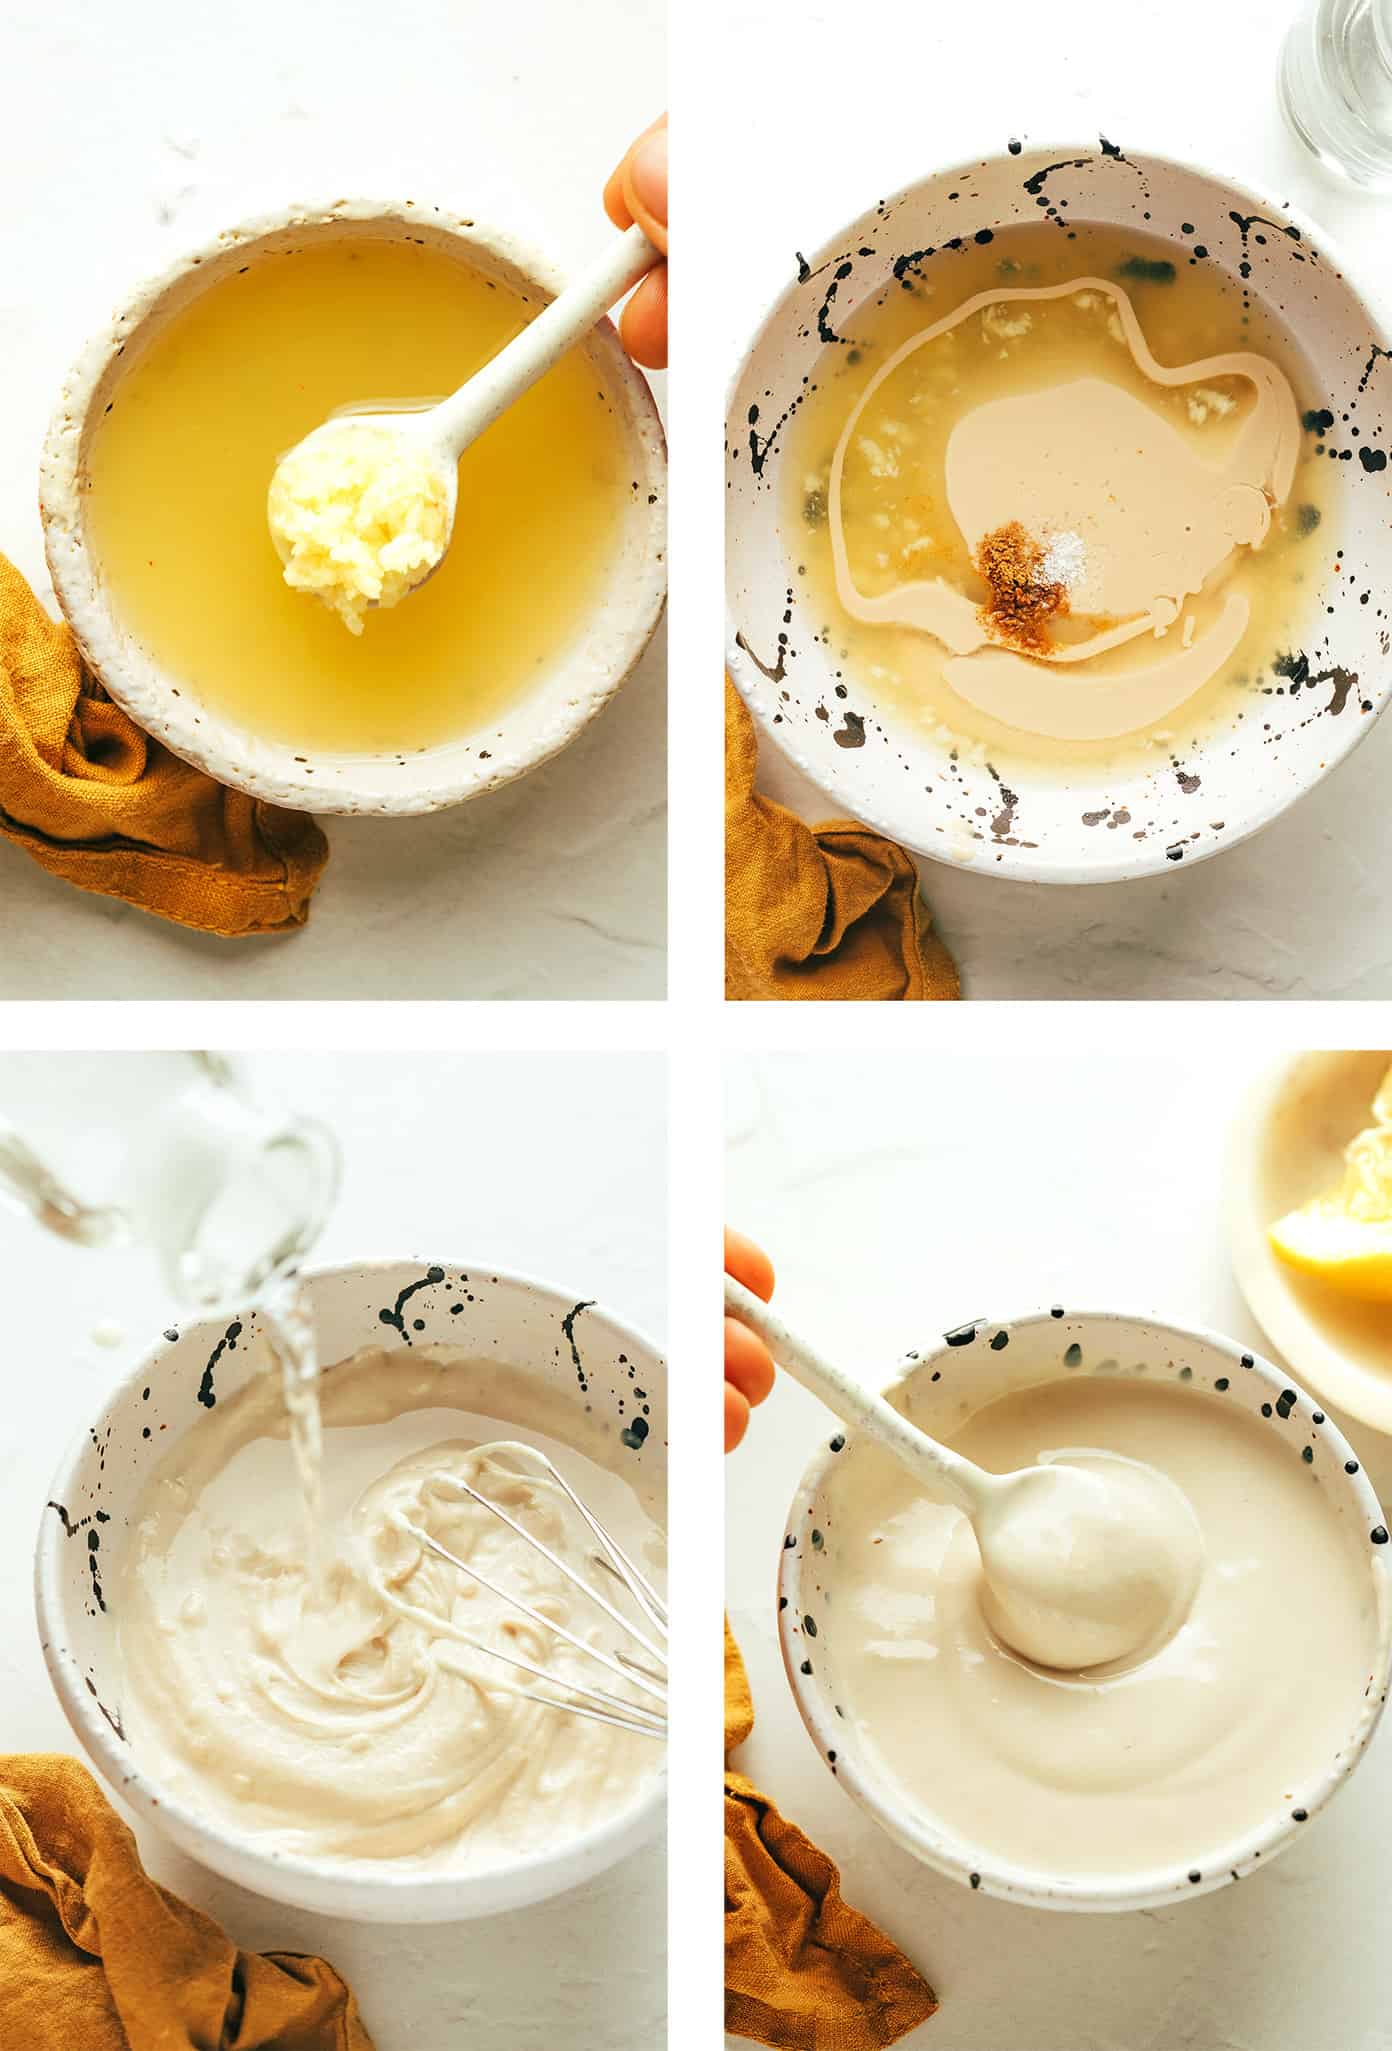 Step by step photos showing how to make tahini sauce